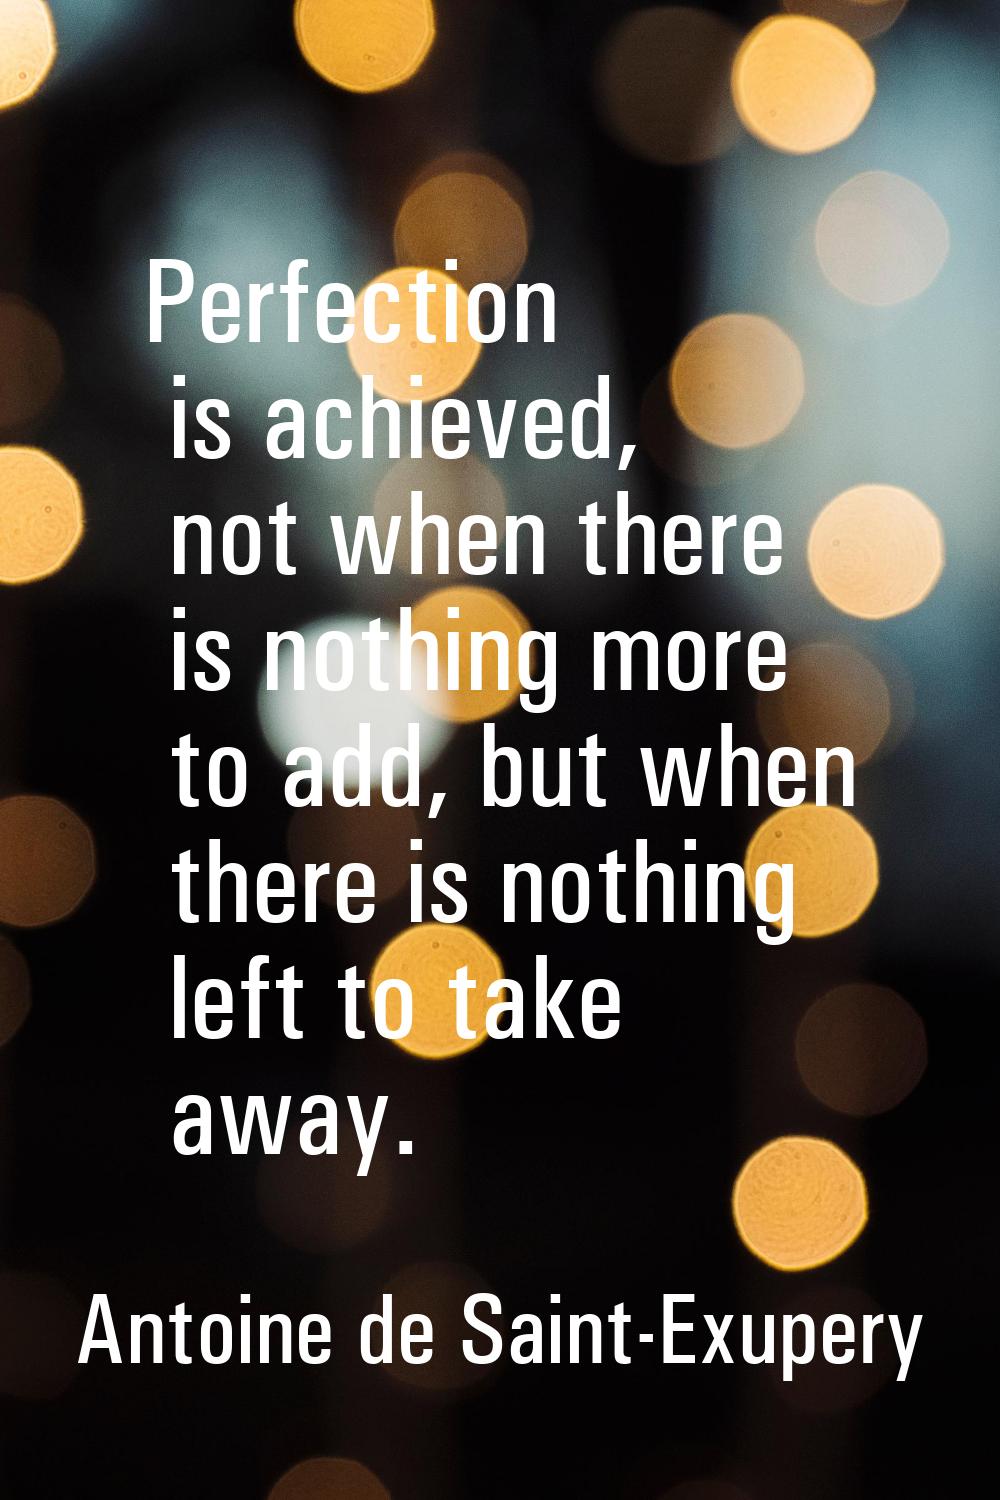 Perfection is achieved, not when there is nothing more to add, but when there is nothing left to ta